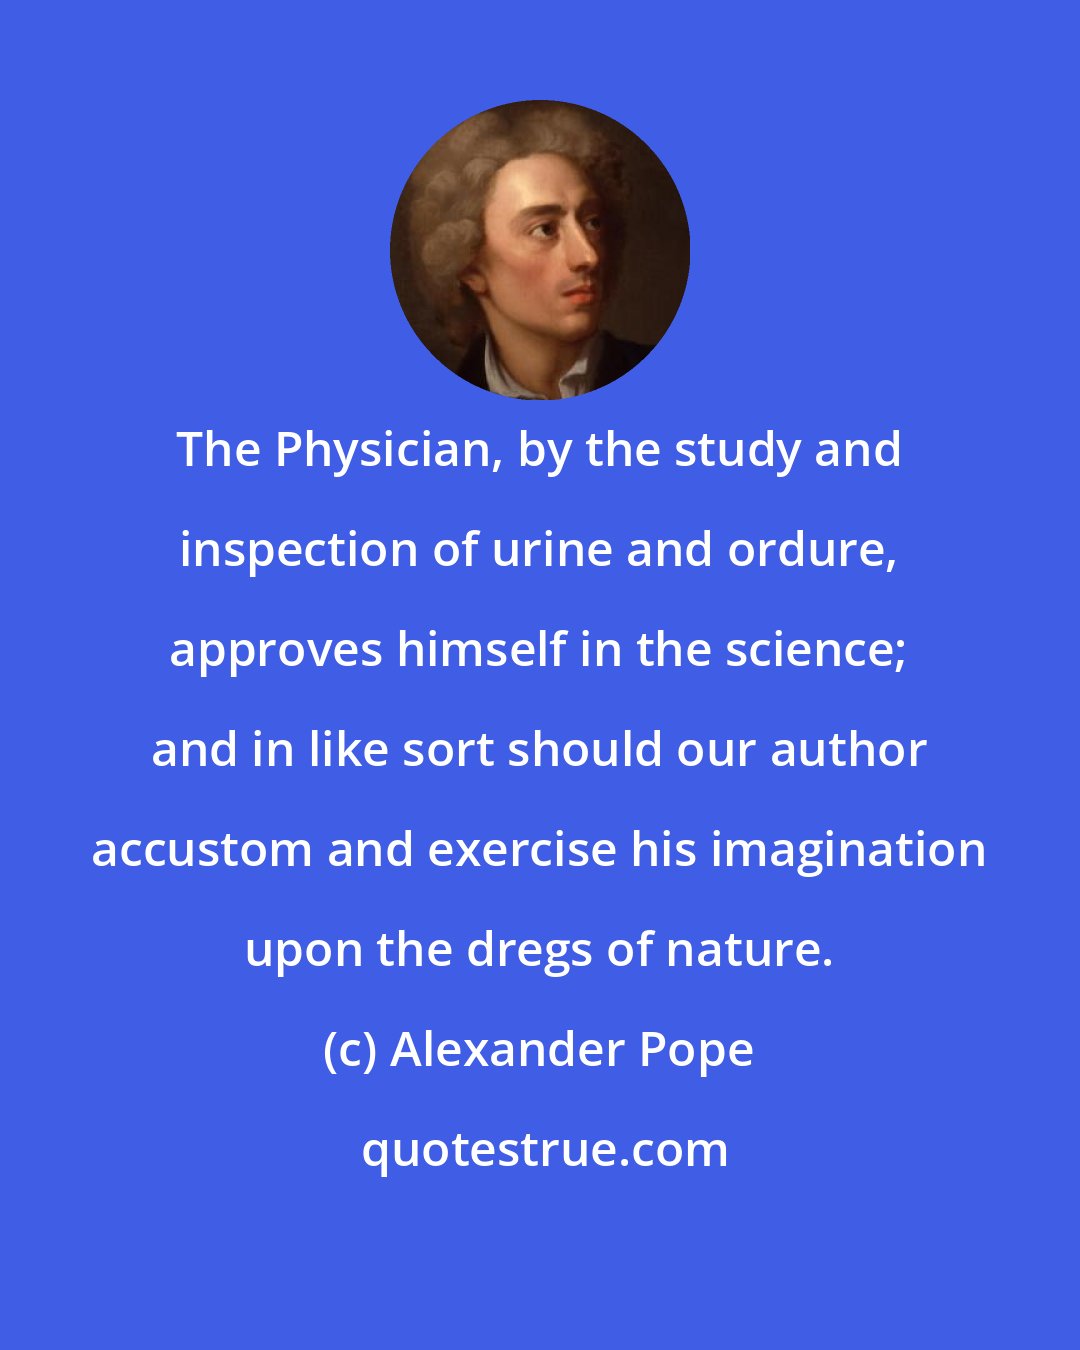 Alexander Pope: The Physician, by the study and inspection of urine and ordure, approves himself in the science; and in like sort should our author accustom and exercise his imagination upon the dregs of nature.